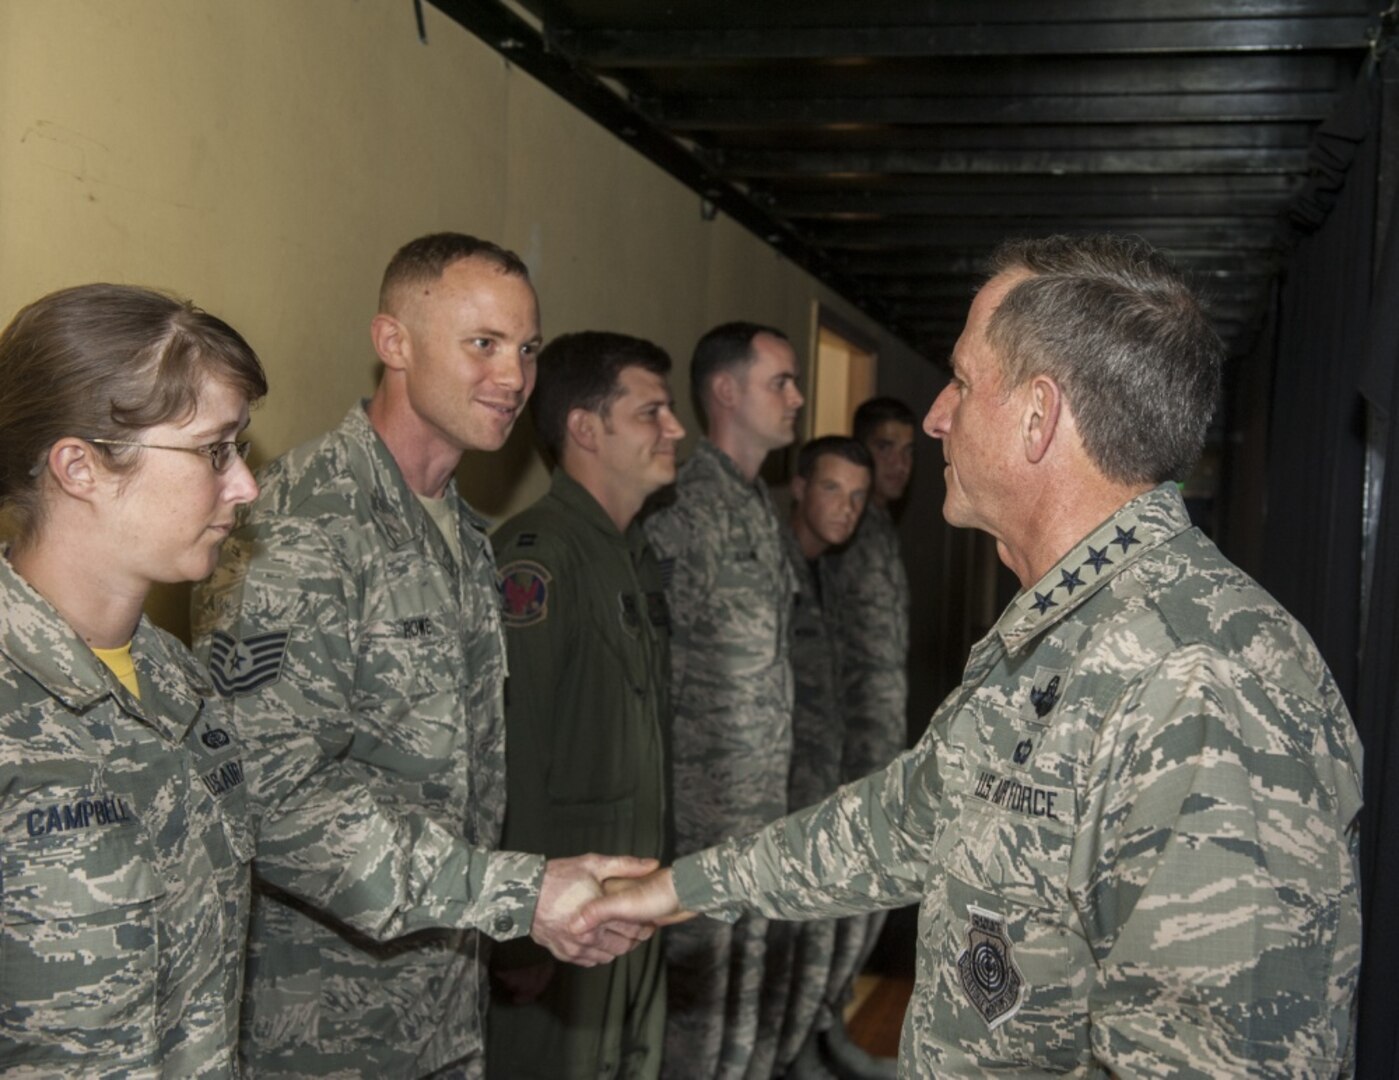 Air Force Chief of Staff Gen. Dave Goldfein congratulates Tech. Sgt. Kyle Rowe, 18th Wing Safety Office occupational safety manager, on outstanding NCO excellence Nov. 4, 2016, at Kadena Air Base, Japan. During his visit, Goldfein congratulated and coined Kadena’s top performers in different units throughout the base. 